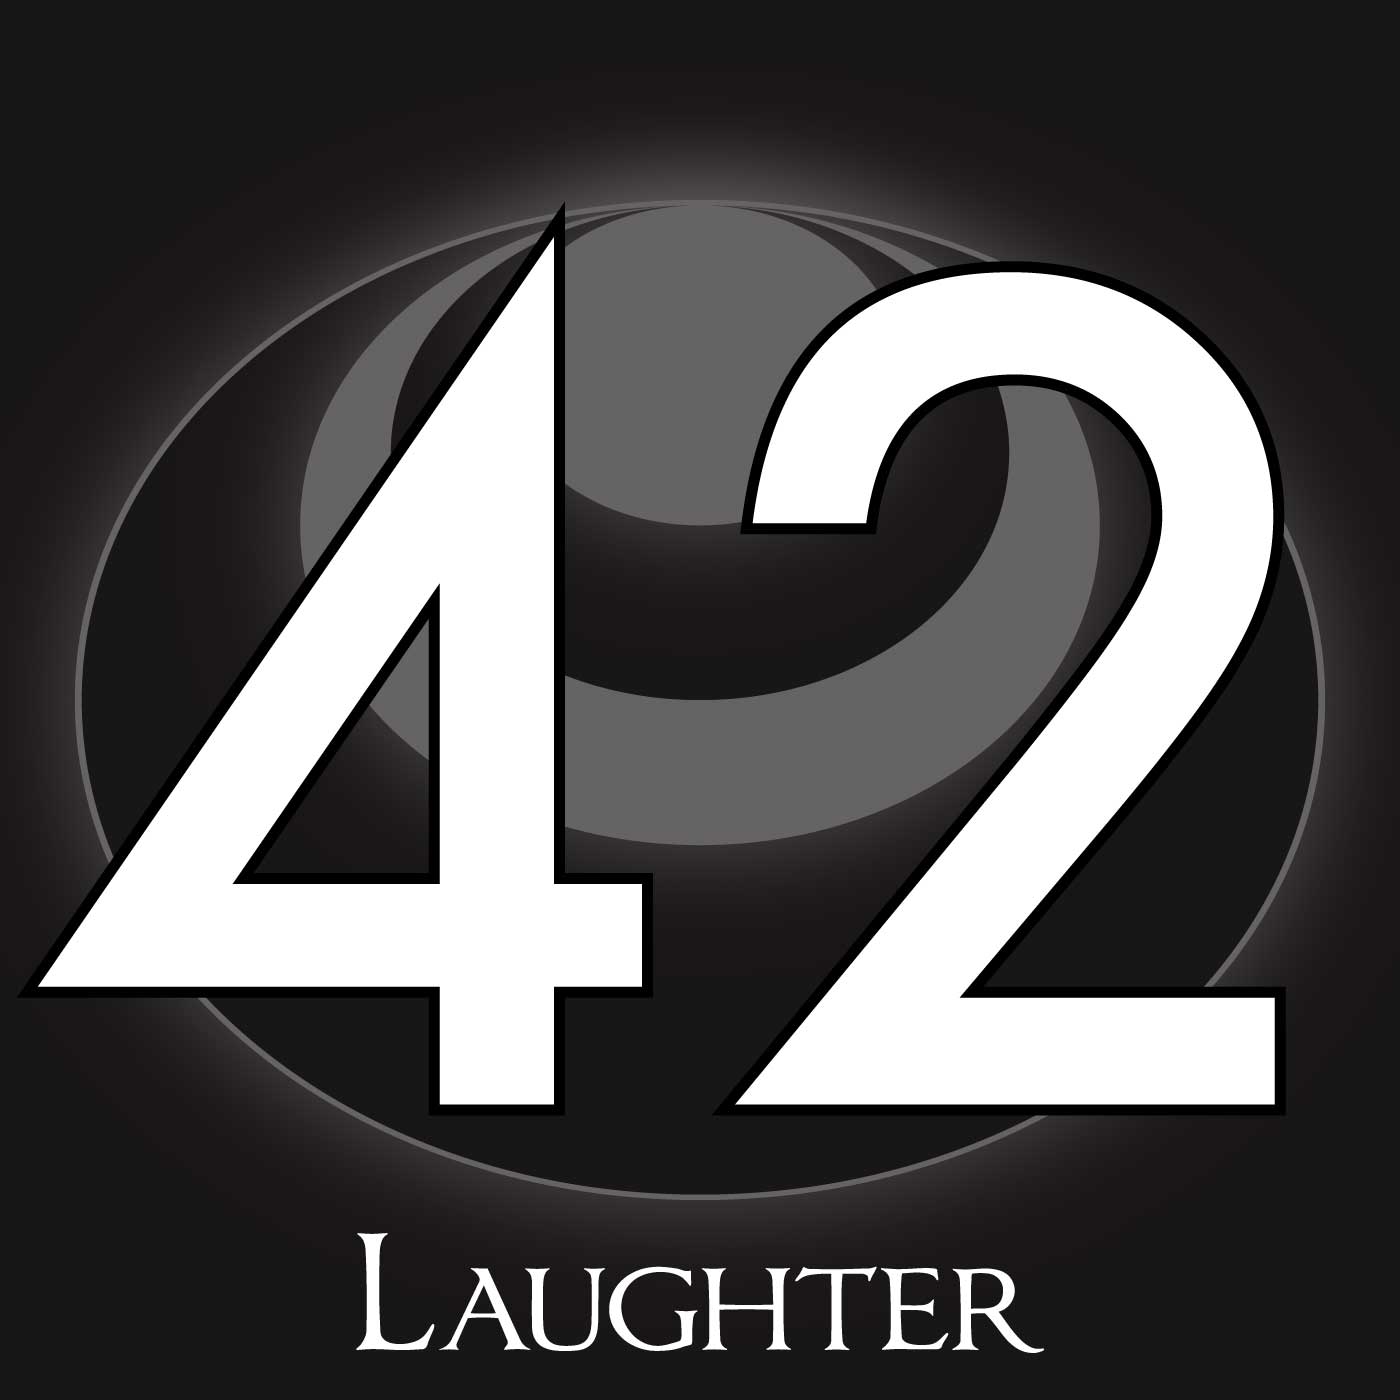 42 – Laughter